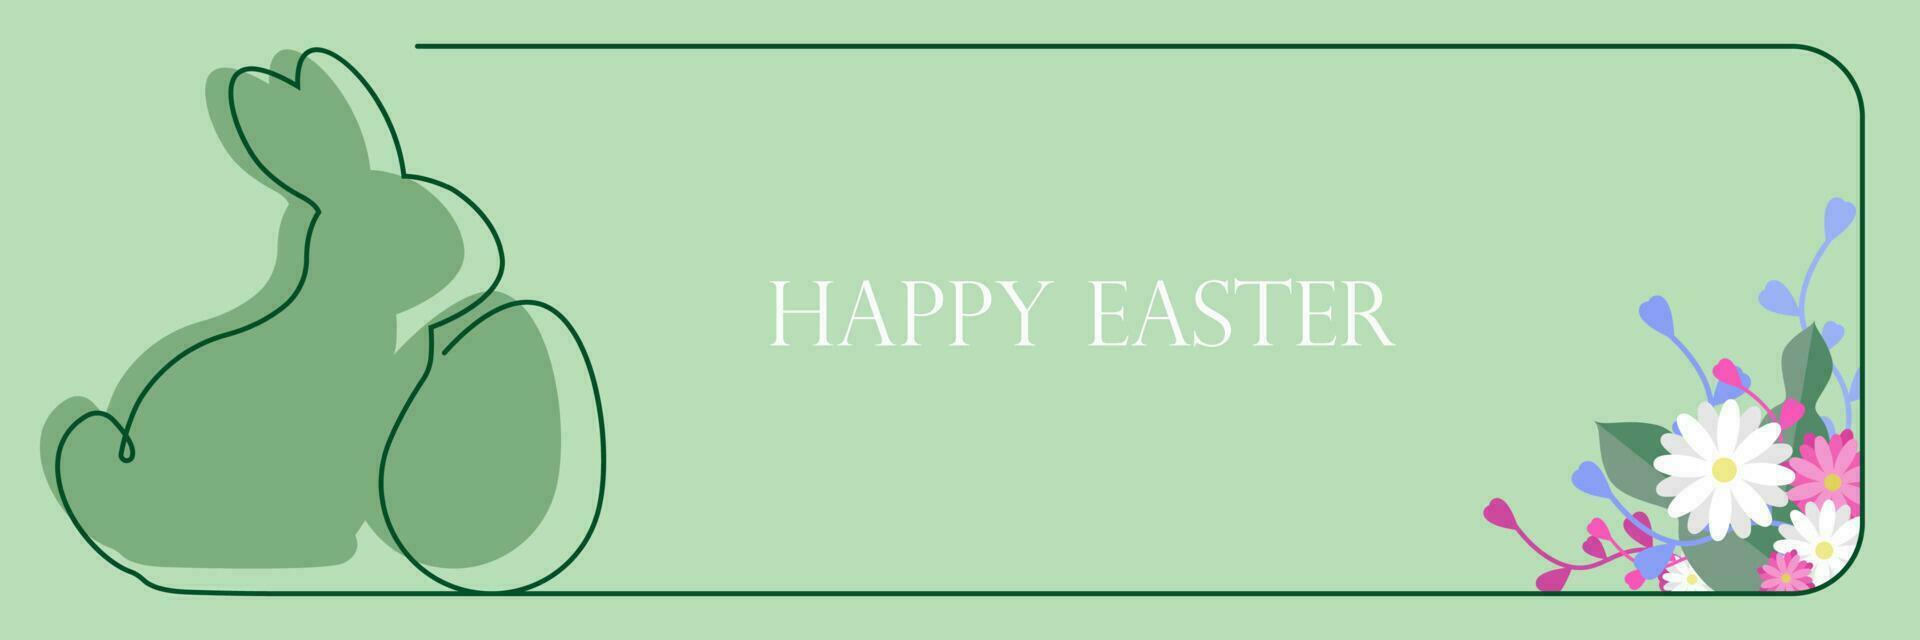 Have Yourself a Very Happy Easter. Easter Bunny and eggs Vector